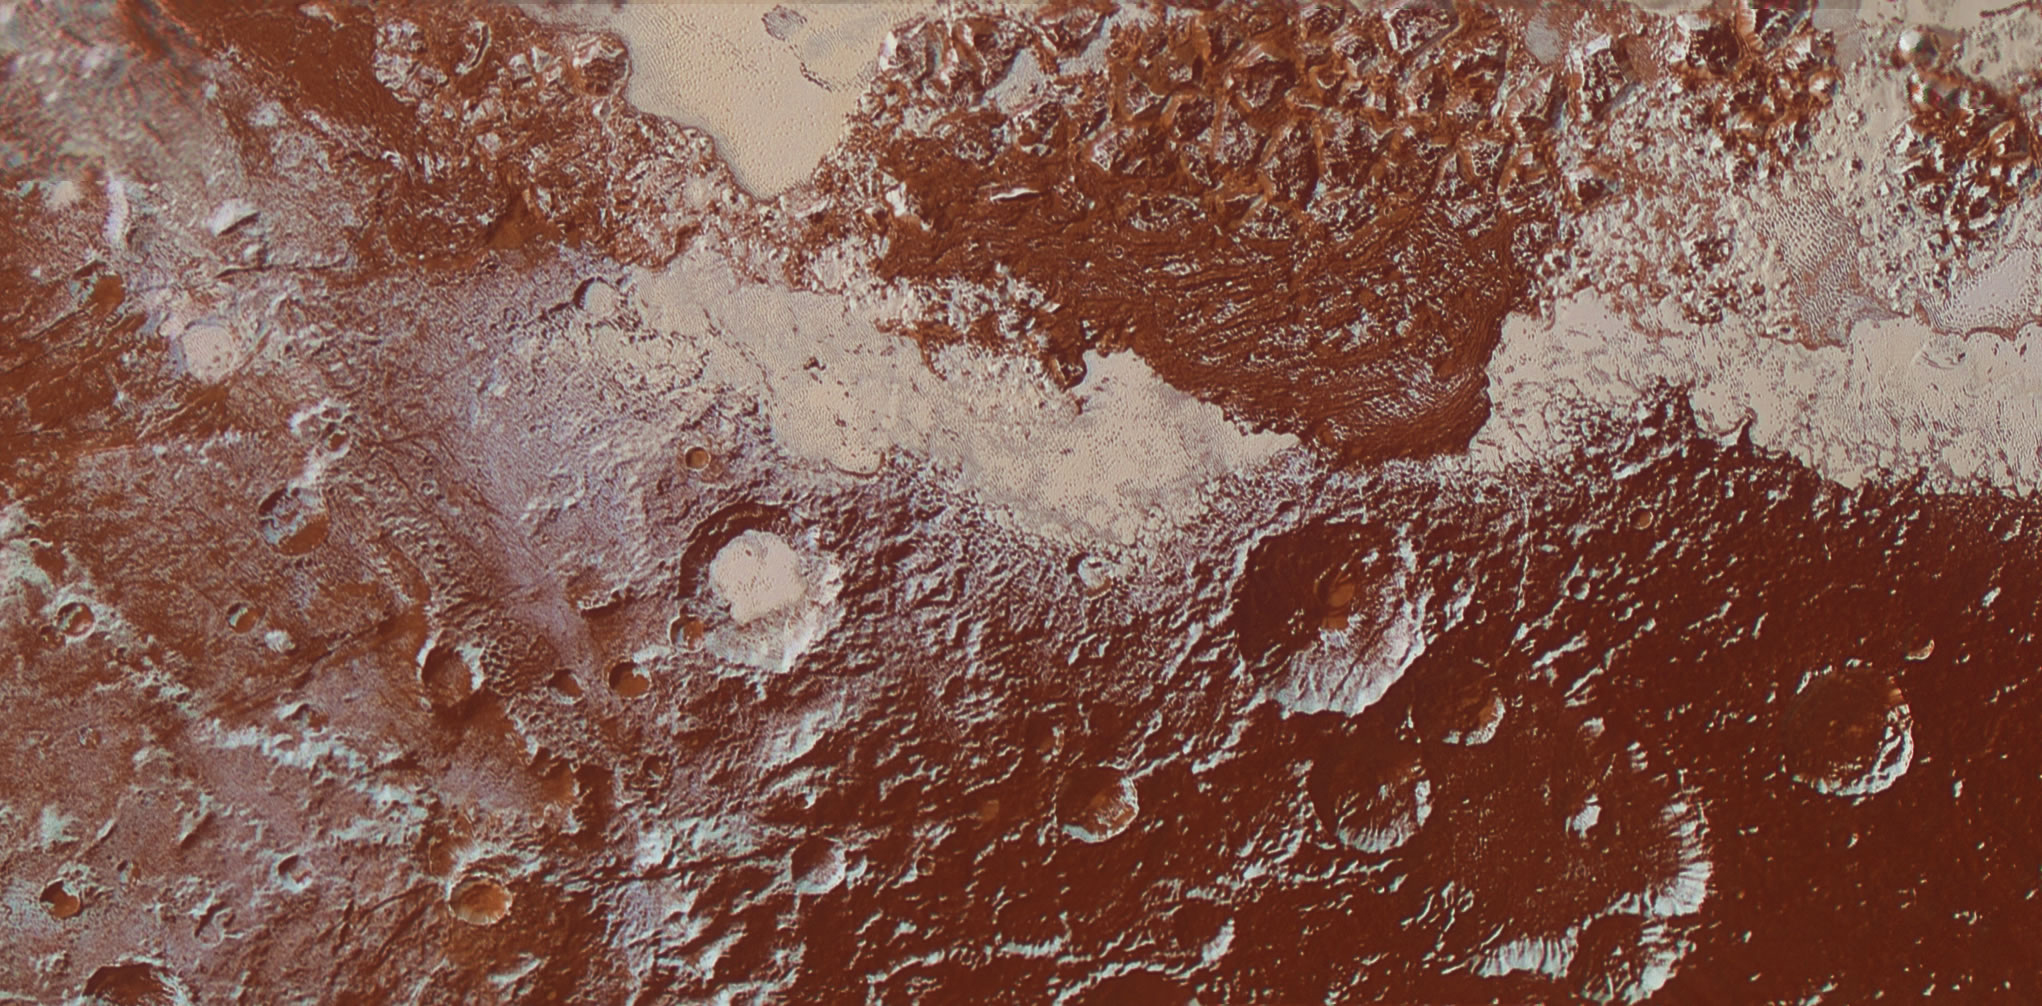 enhanced color view of Pluto’s surface diversity